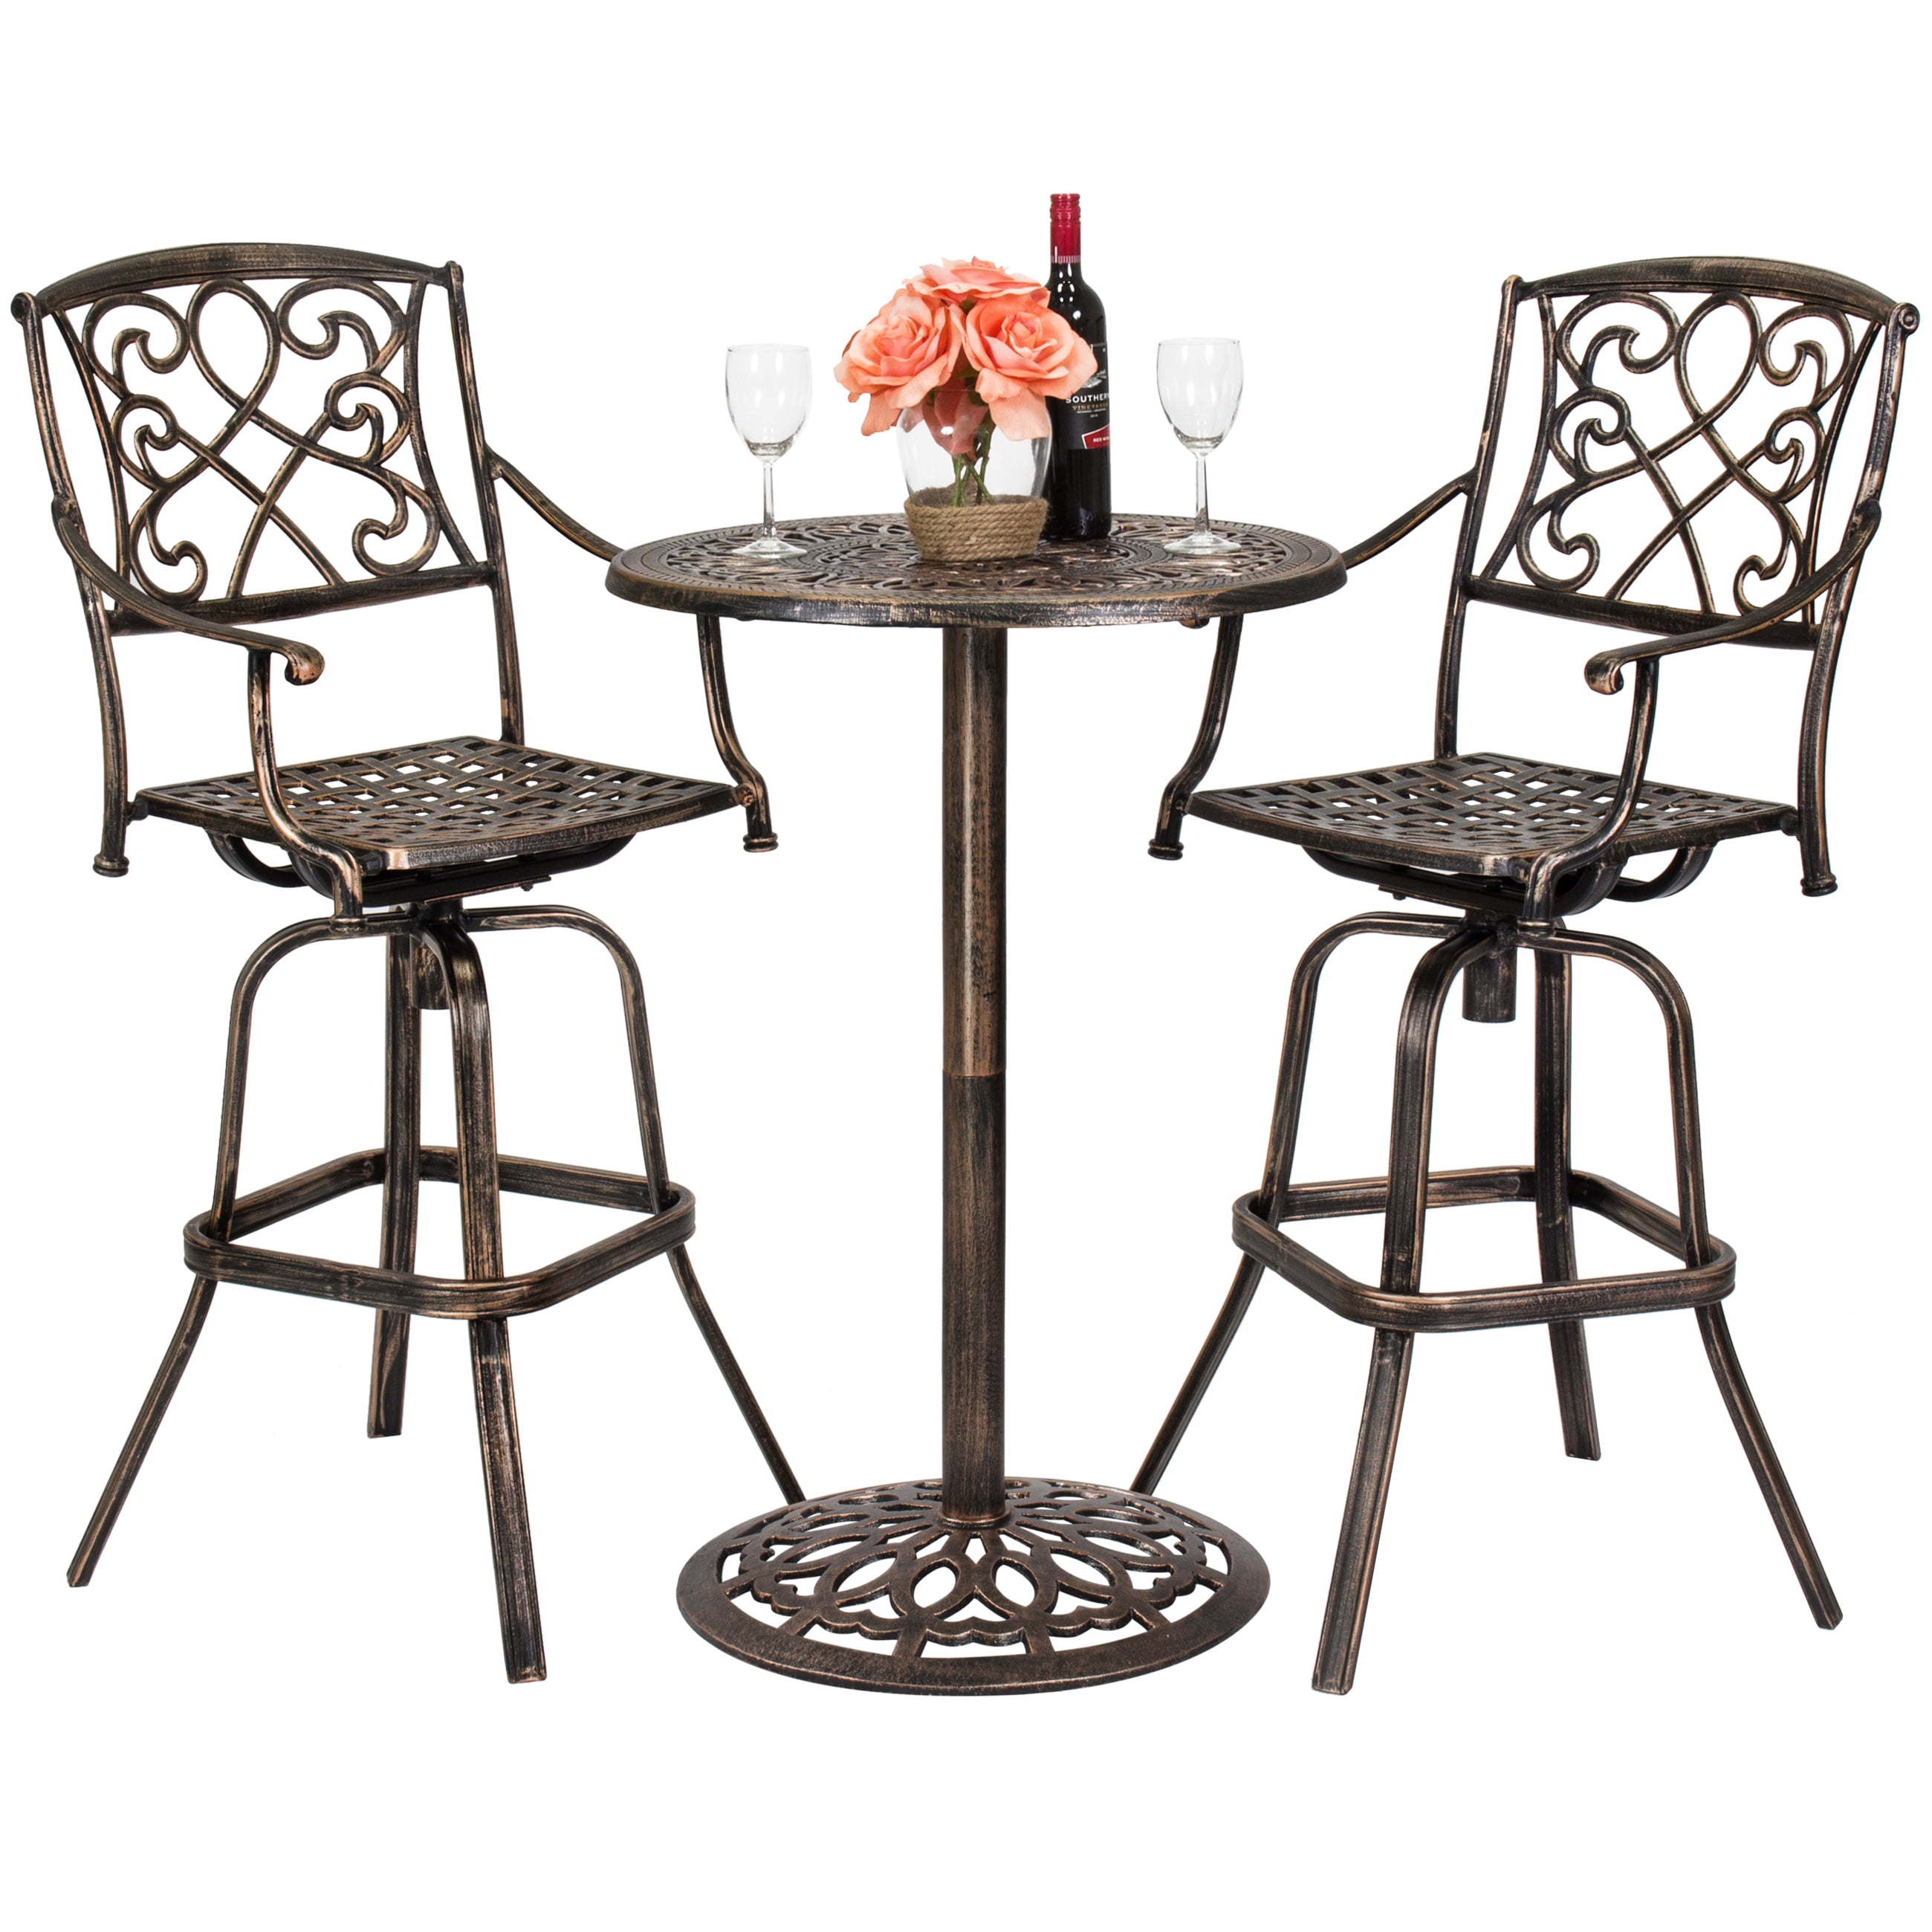 Outdoor Cast Aluminum Bar Height, Small Counter Height Outdoor Bistro Table